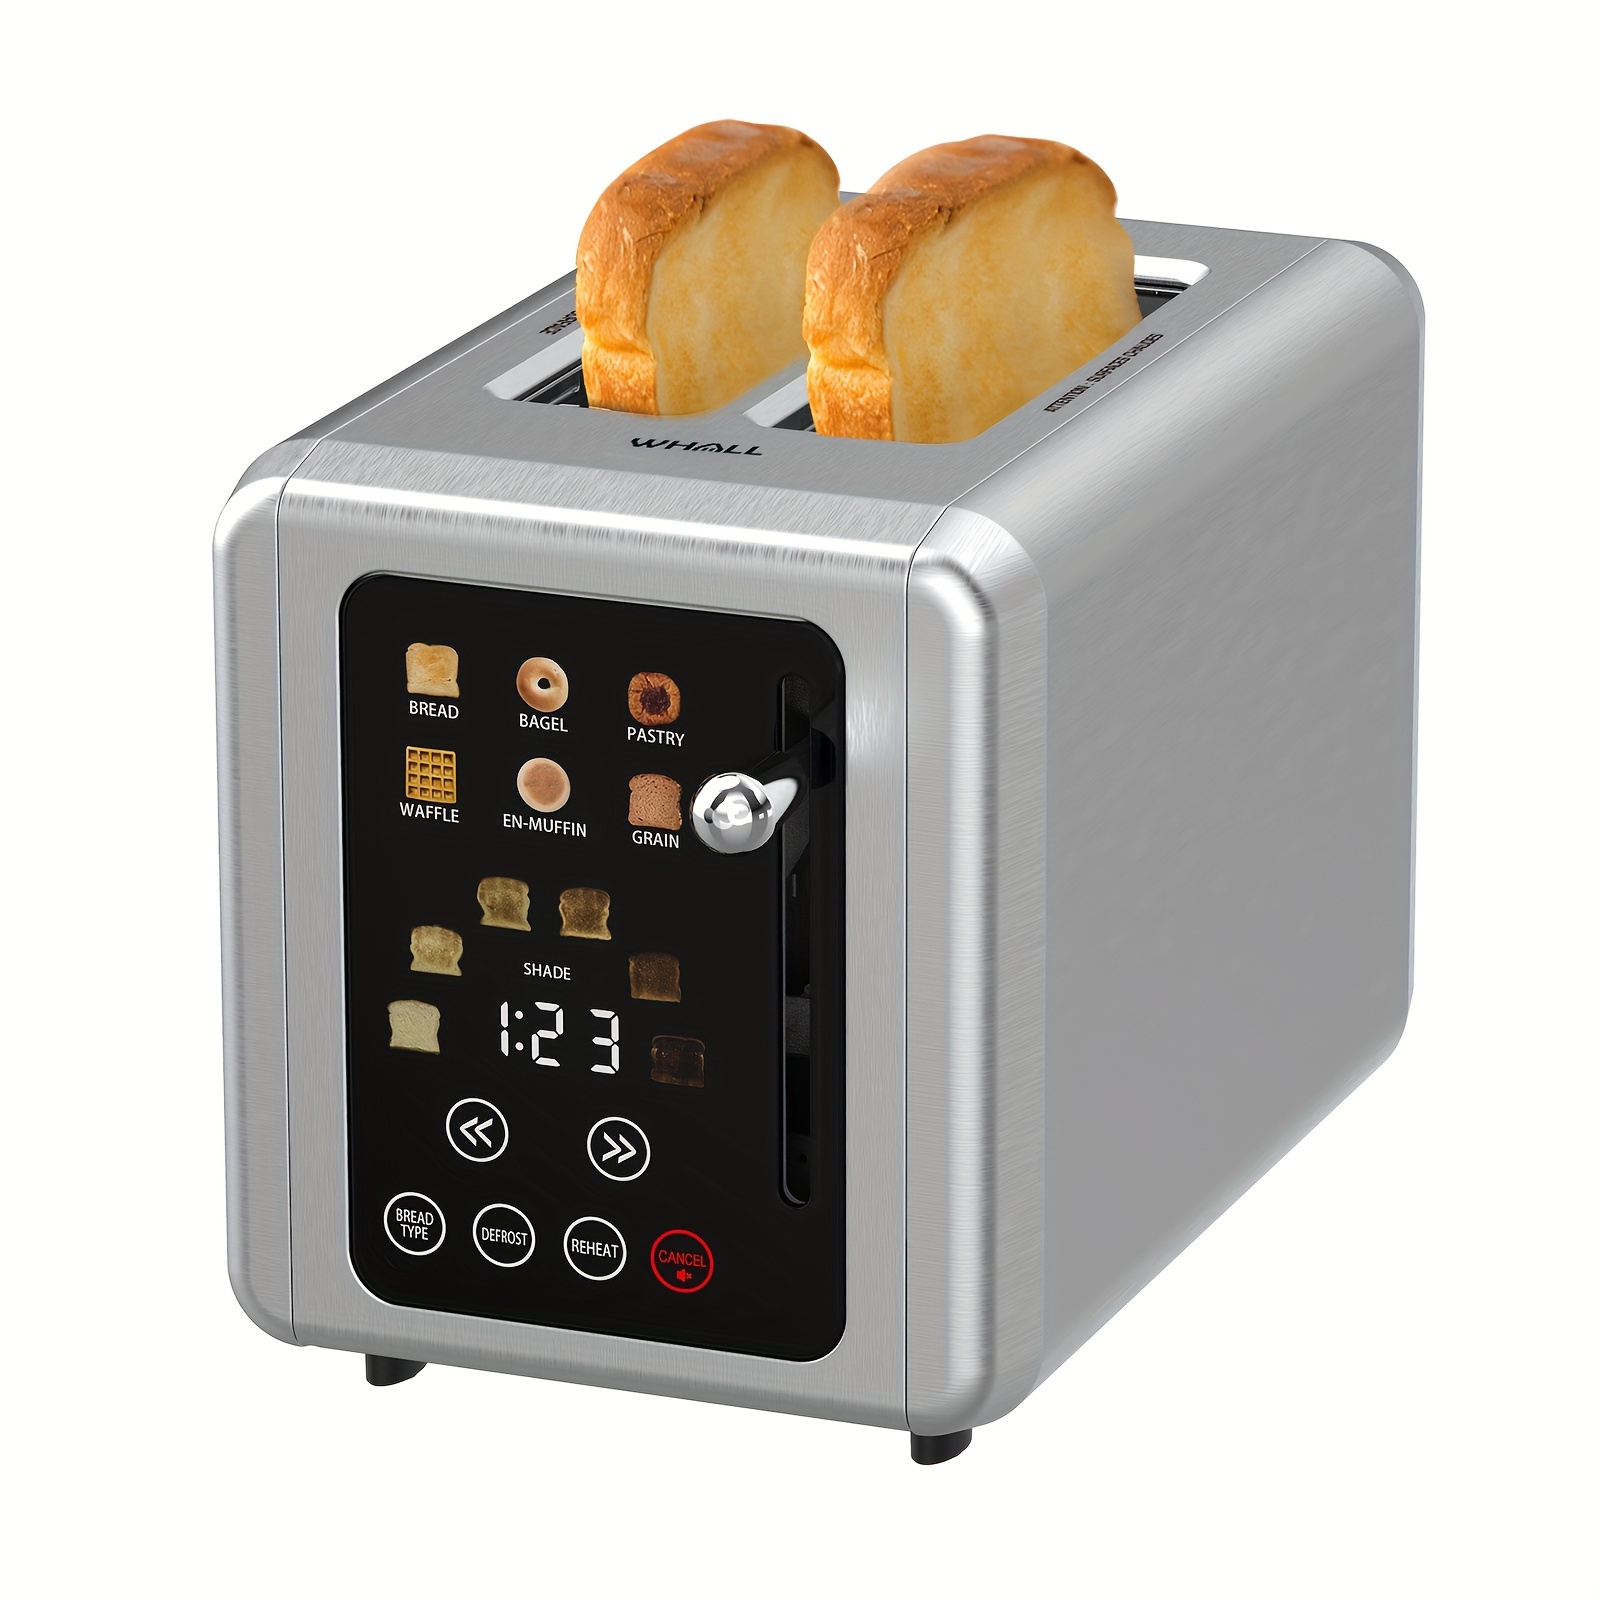 

Whall® Touch Screen Toaster 2 , Stainless Steel Digital Timer Toaster, 6 Bread Types & 6 Shade Settings, Smart Extra Wide Slots Toaster With Bagel, Cancel, Defrost Functions